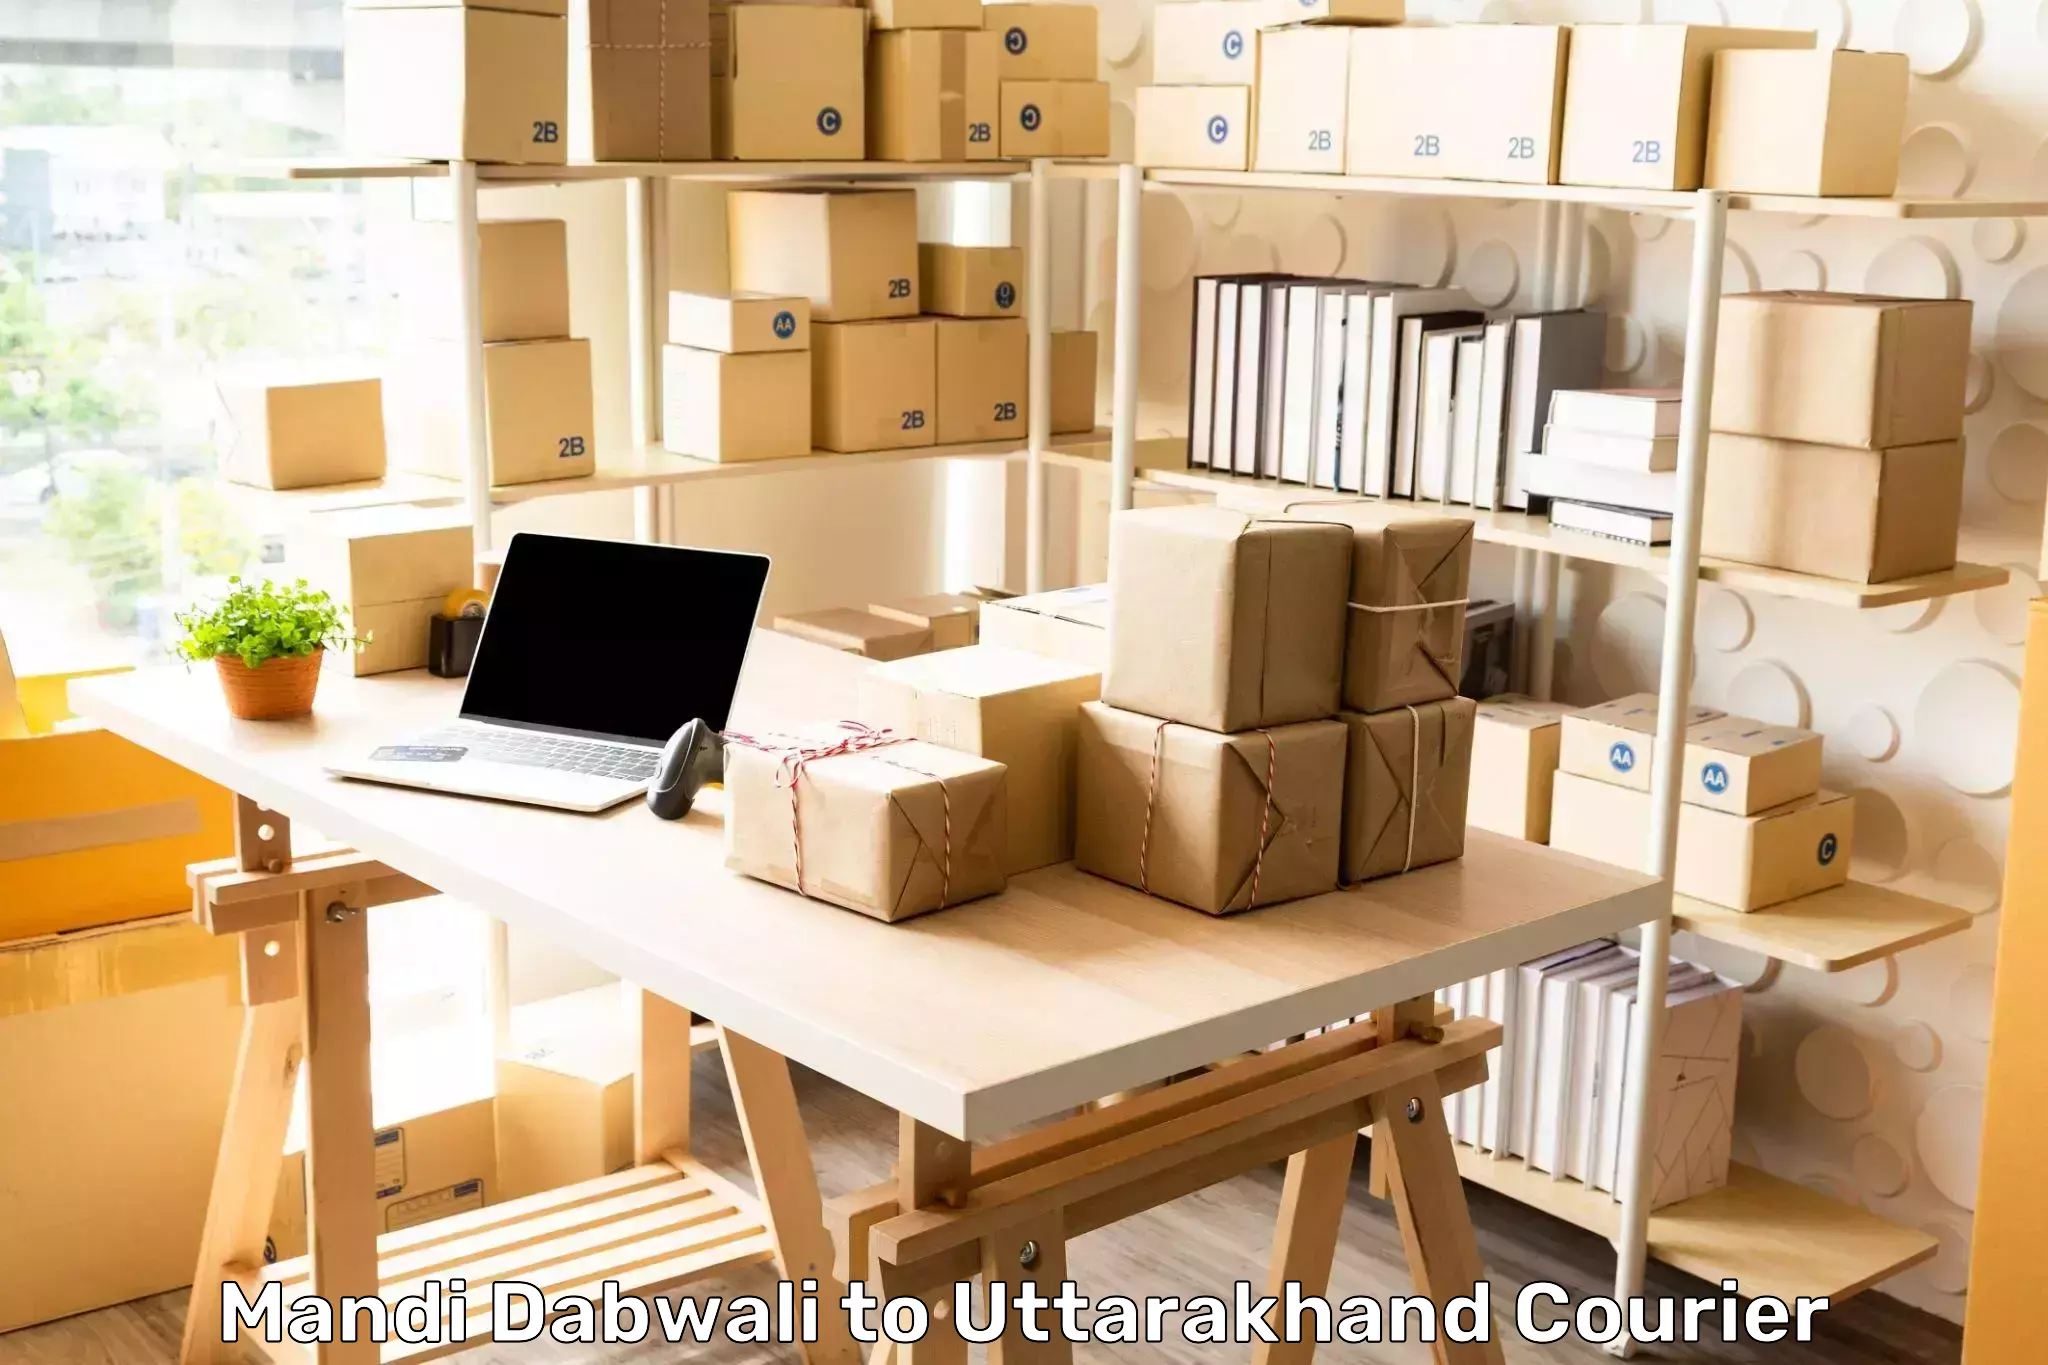 Global shipping solutions in Mandi Dabwali to Almora